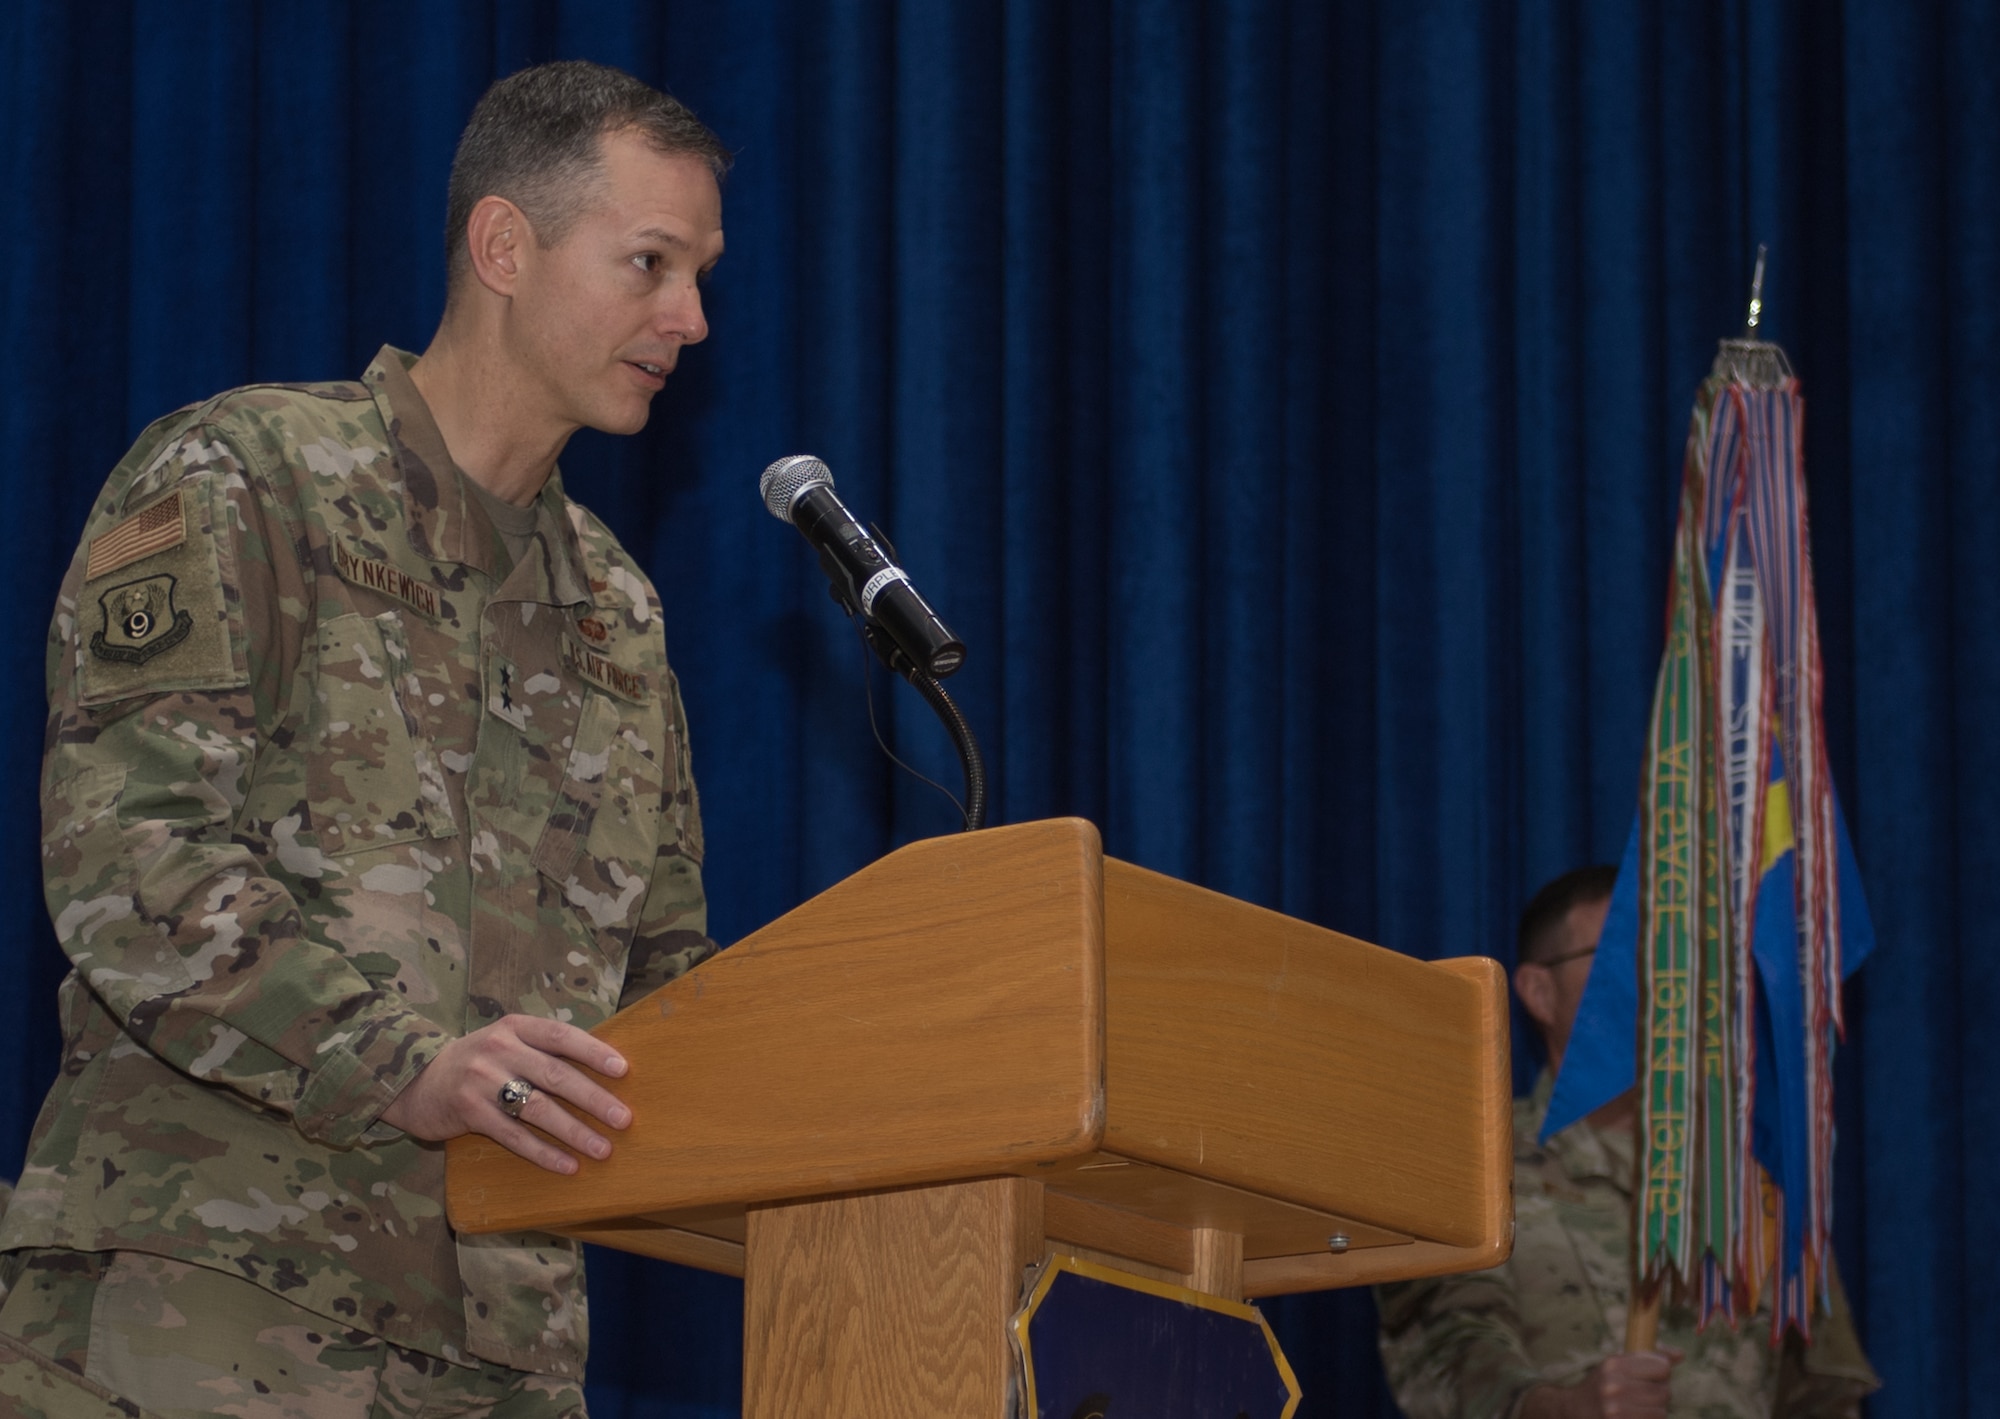 U.S. Air Force Maj. Gen. Alexus G. Grynkewich, 9th Air Expeditionary Task Force-Levant commander, provides remarks during the 386th Air Expeditionary Wing change of command ceremony at Ali Al Salem Air Base, Kuwait, July 11, 2019. U.S. Air Force Col. Rodney Simpson took command of the 386th AEW from Col.  Patrick Schlichenmeyer. Grynkewich officiated the ceremony. (U.S. Air Force photo by Tech. Sgt. Daniel Martinez)